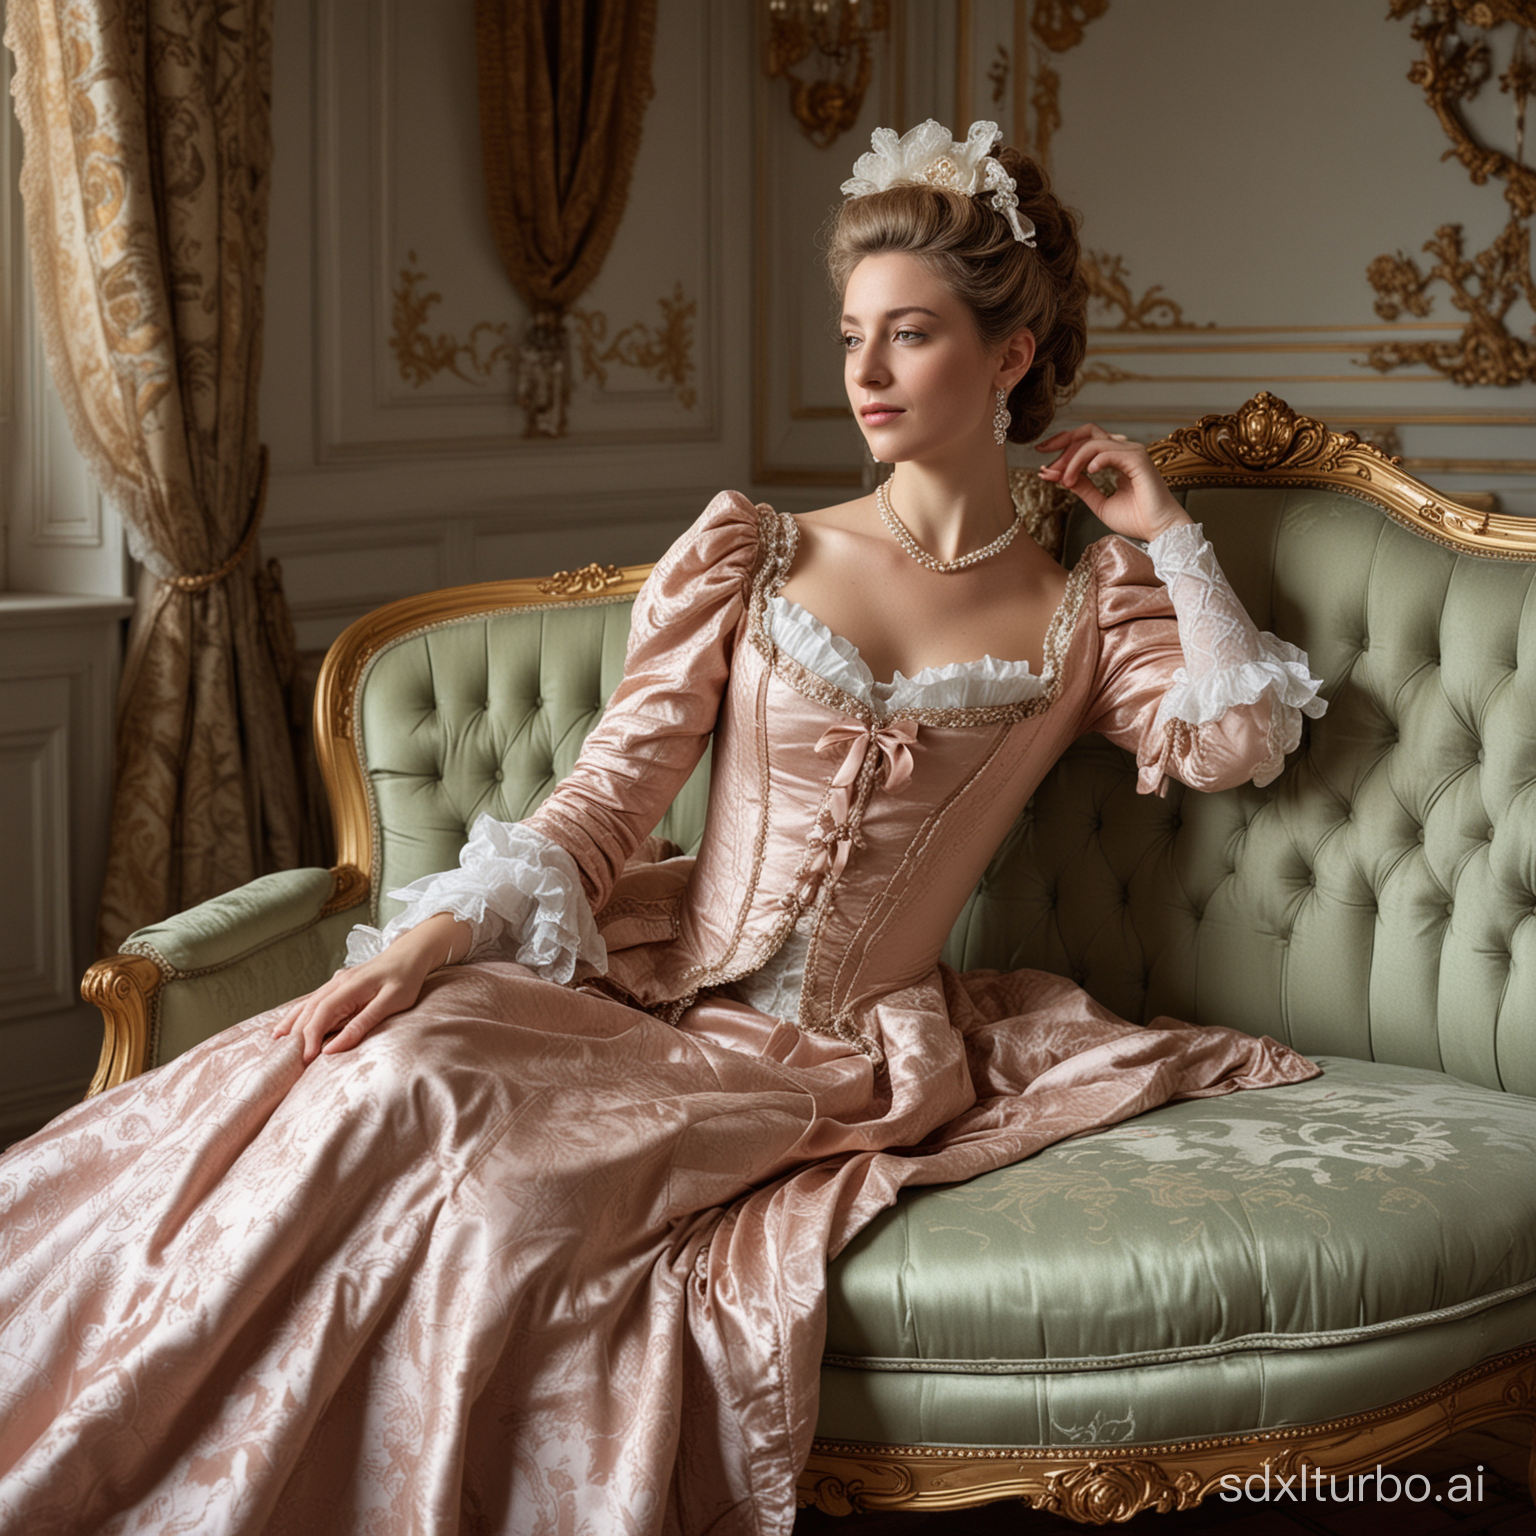 A fully dressed French aristocrat woman from the 18th century sitting on a luxurious rococo couch in a luxurious rococo boudoir